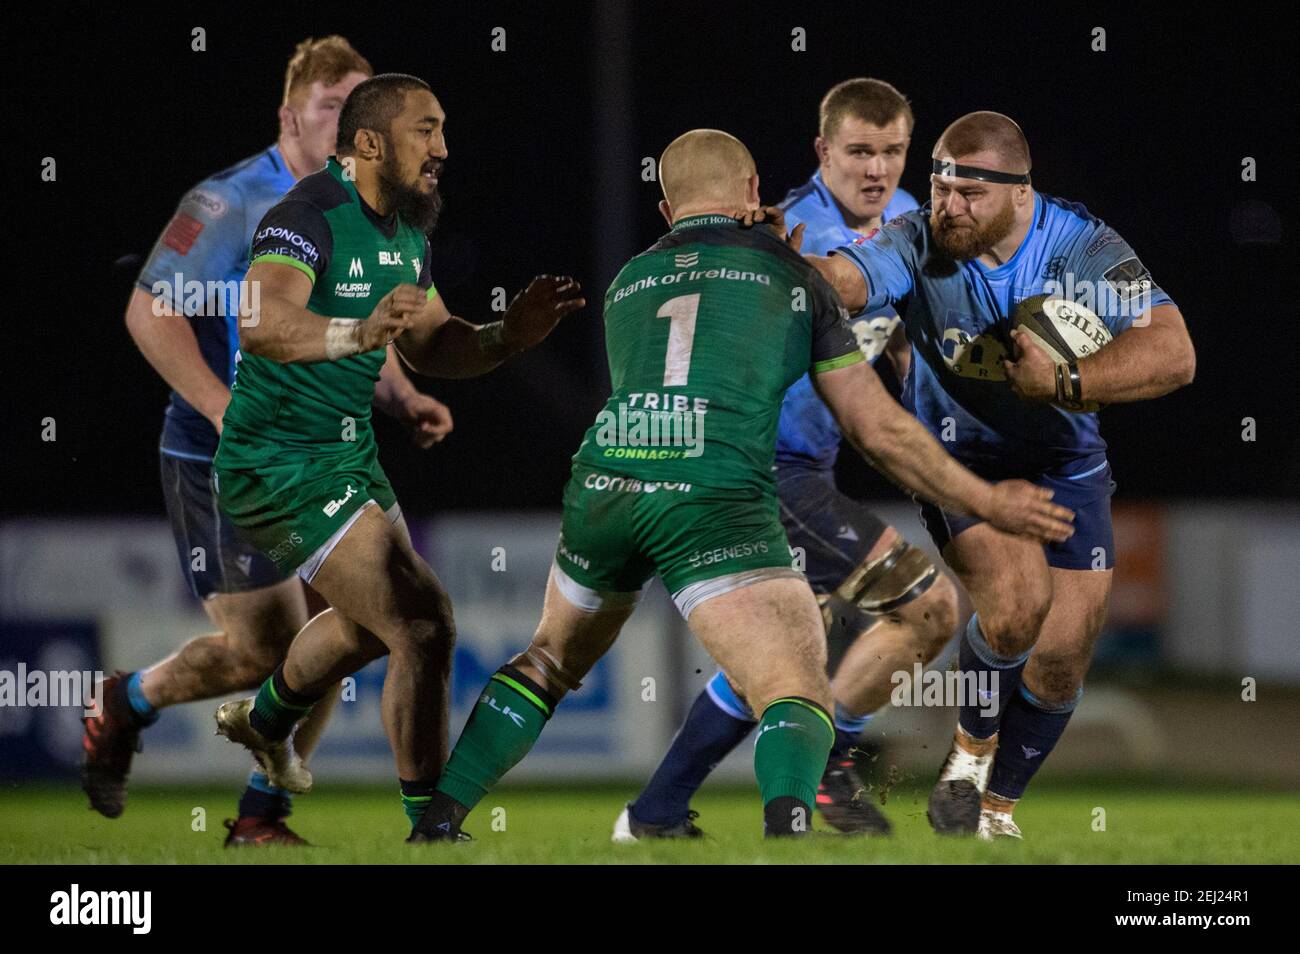 Galway, Ireland. 20th Feb, 2021. Dimitri Arship of Cardiff tackled by  Jordan Duggan of Connacht during the Guinness PRO14 Round 12 match between  Connacht Rugby and Cardiff Blues at the Sportsground in